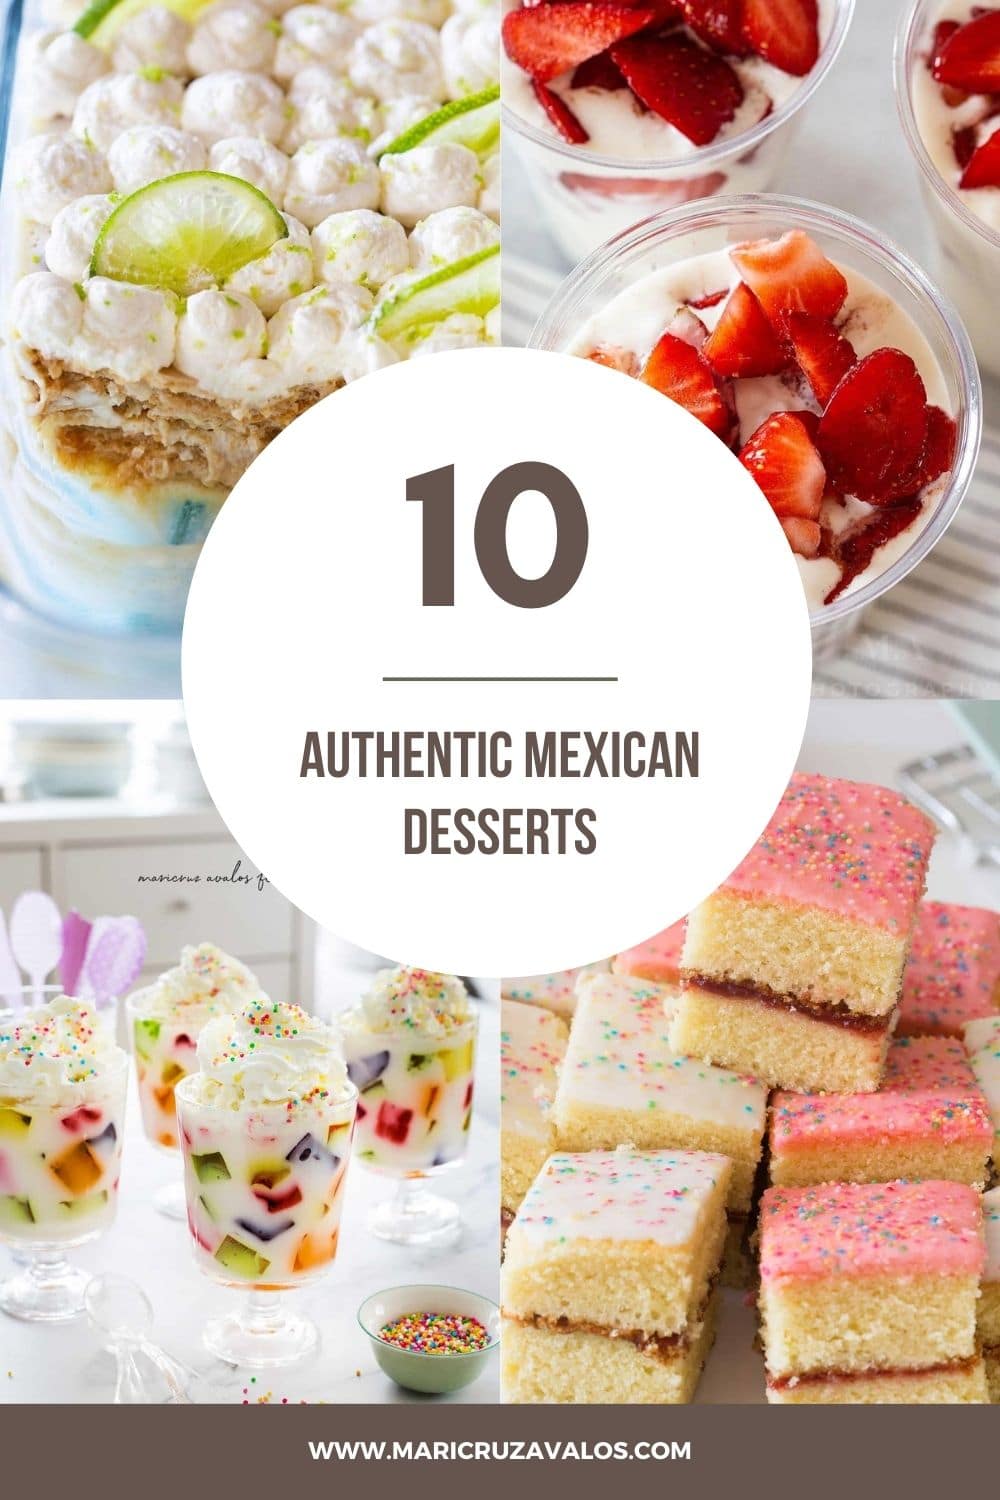 Mexican desserts collage with text overlay.